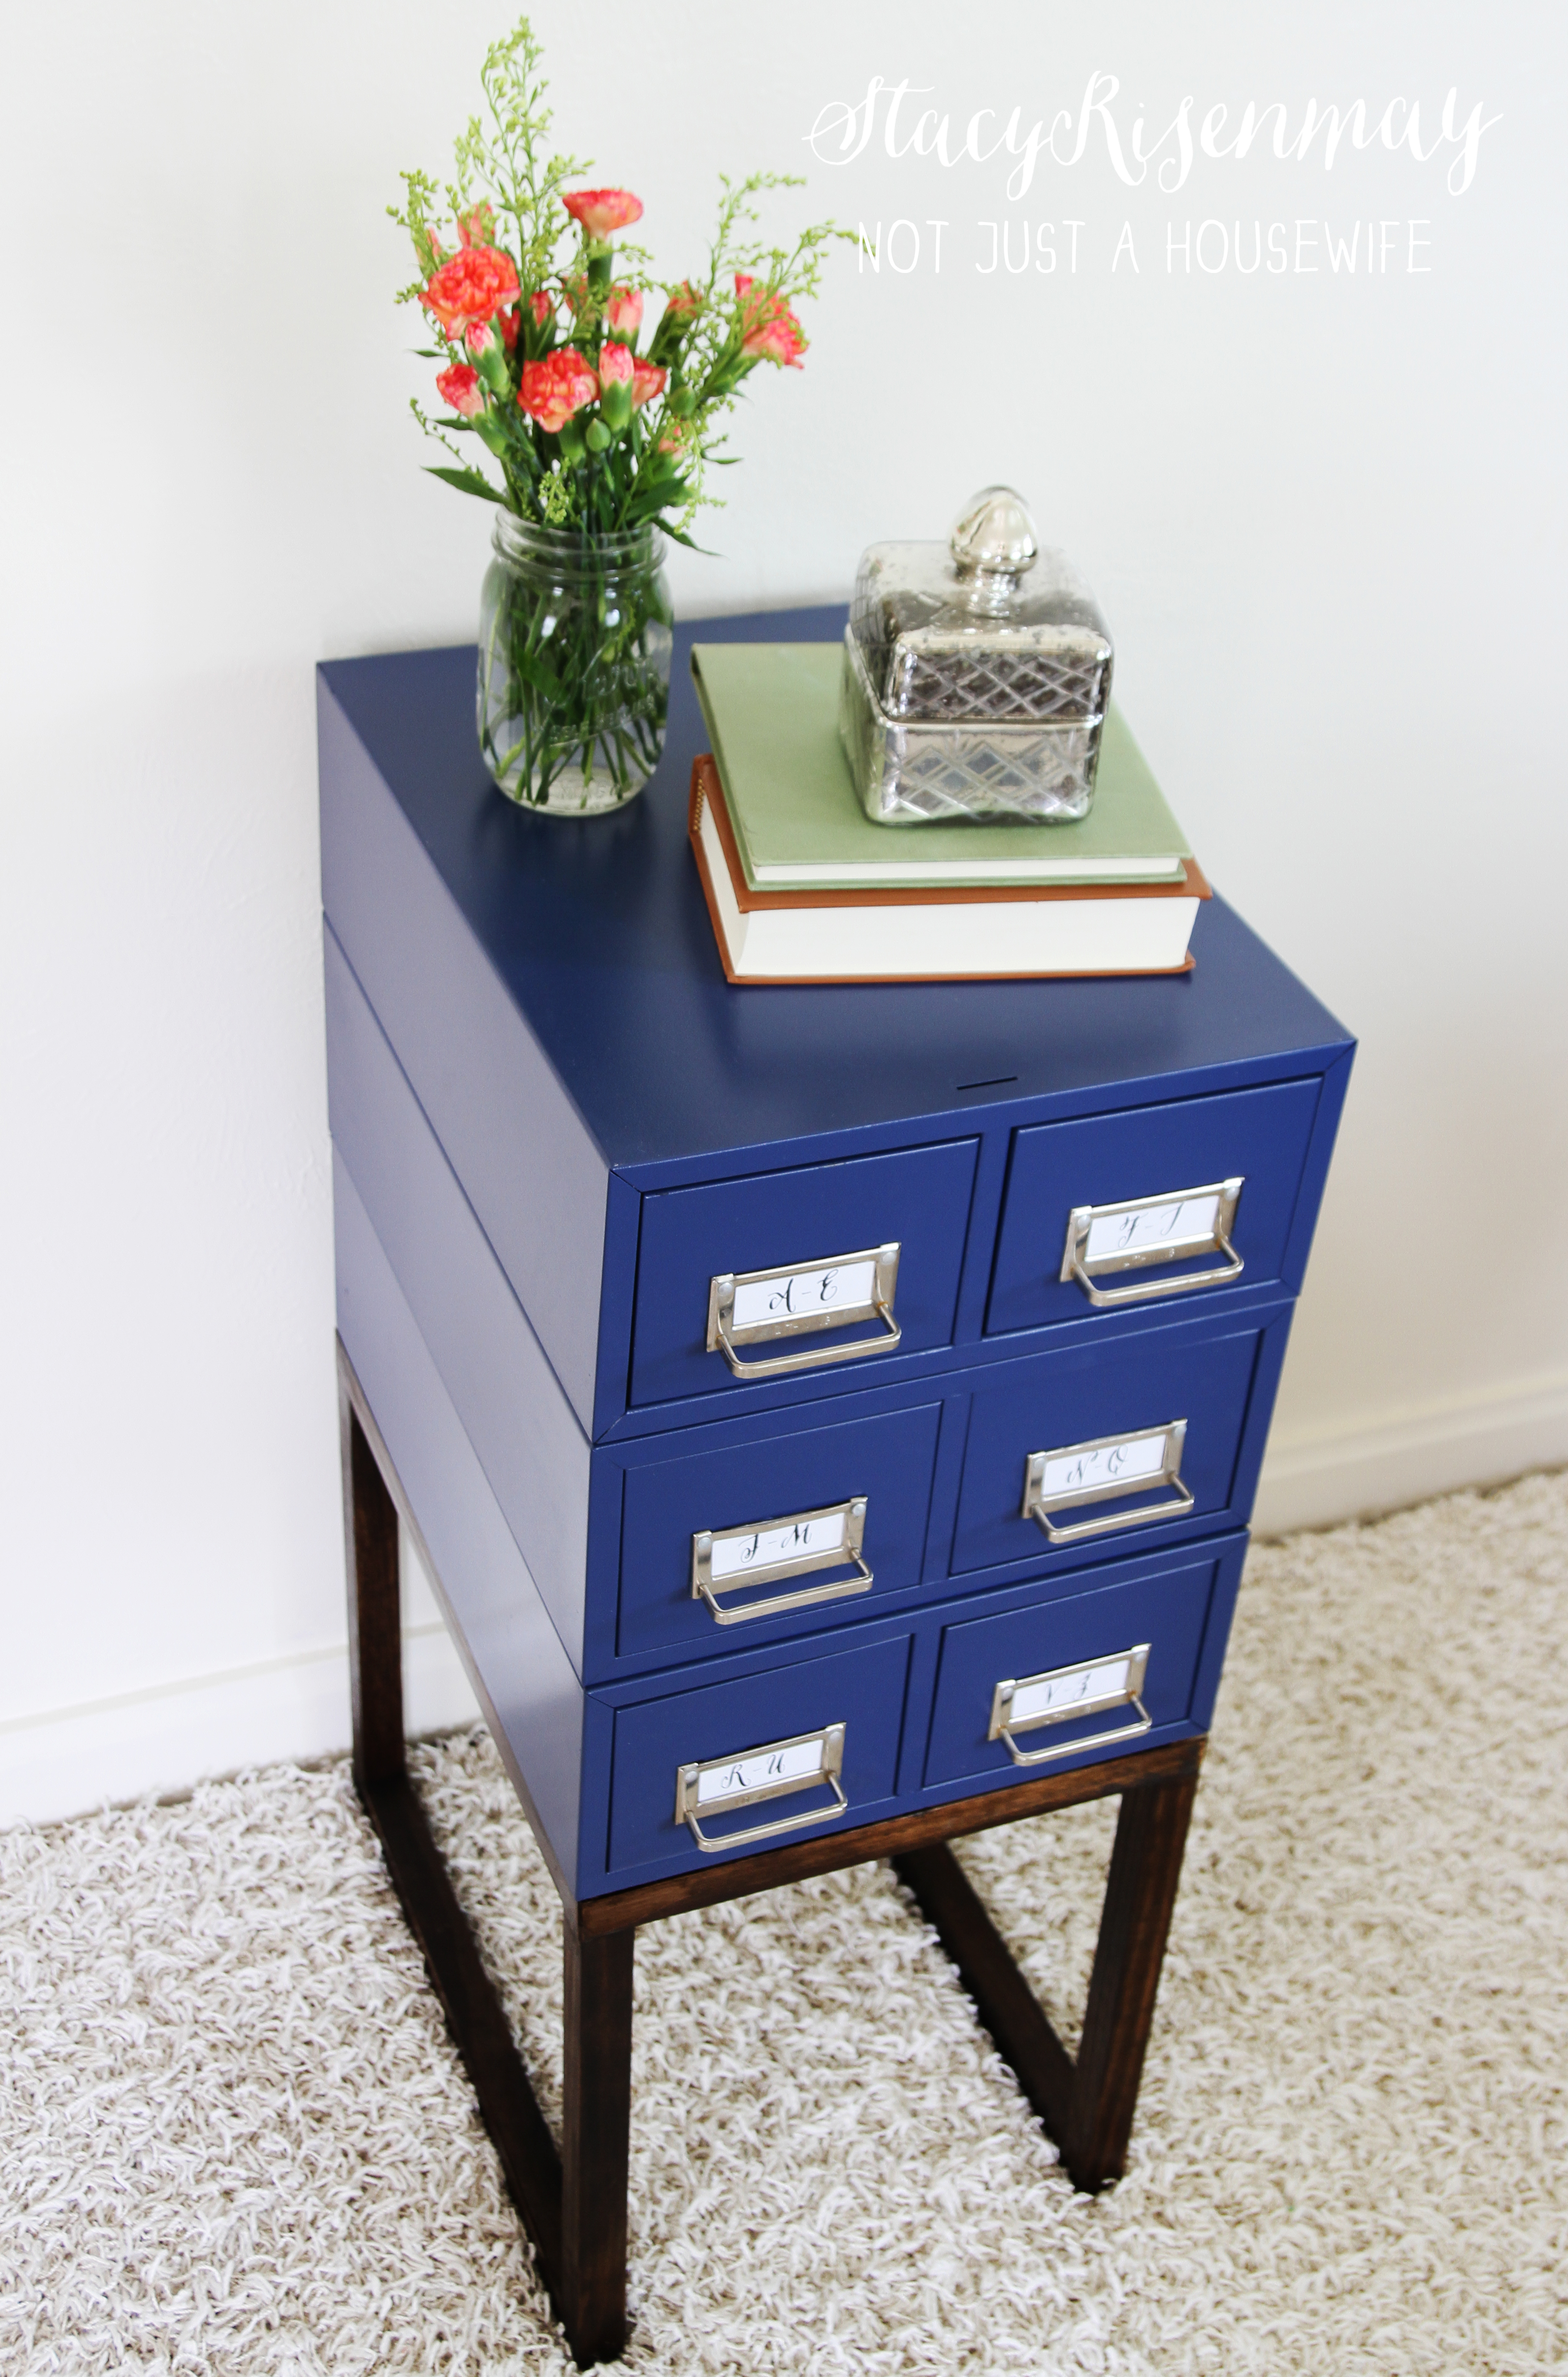 Attractive Side Table File Cabinet Wf82 Roccommunity in sizing 3234 X 4903